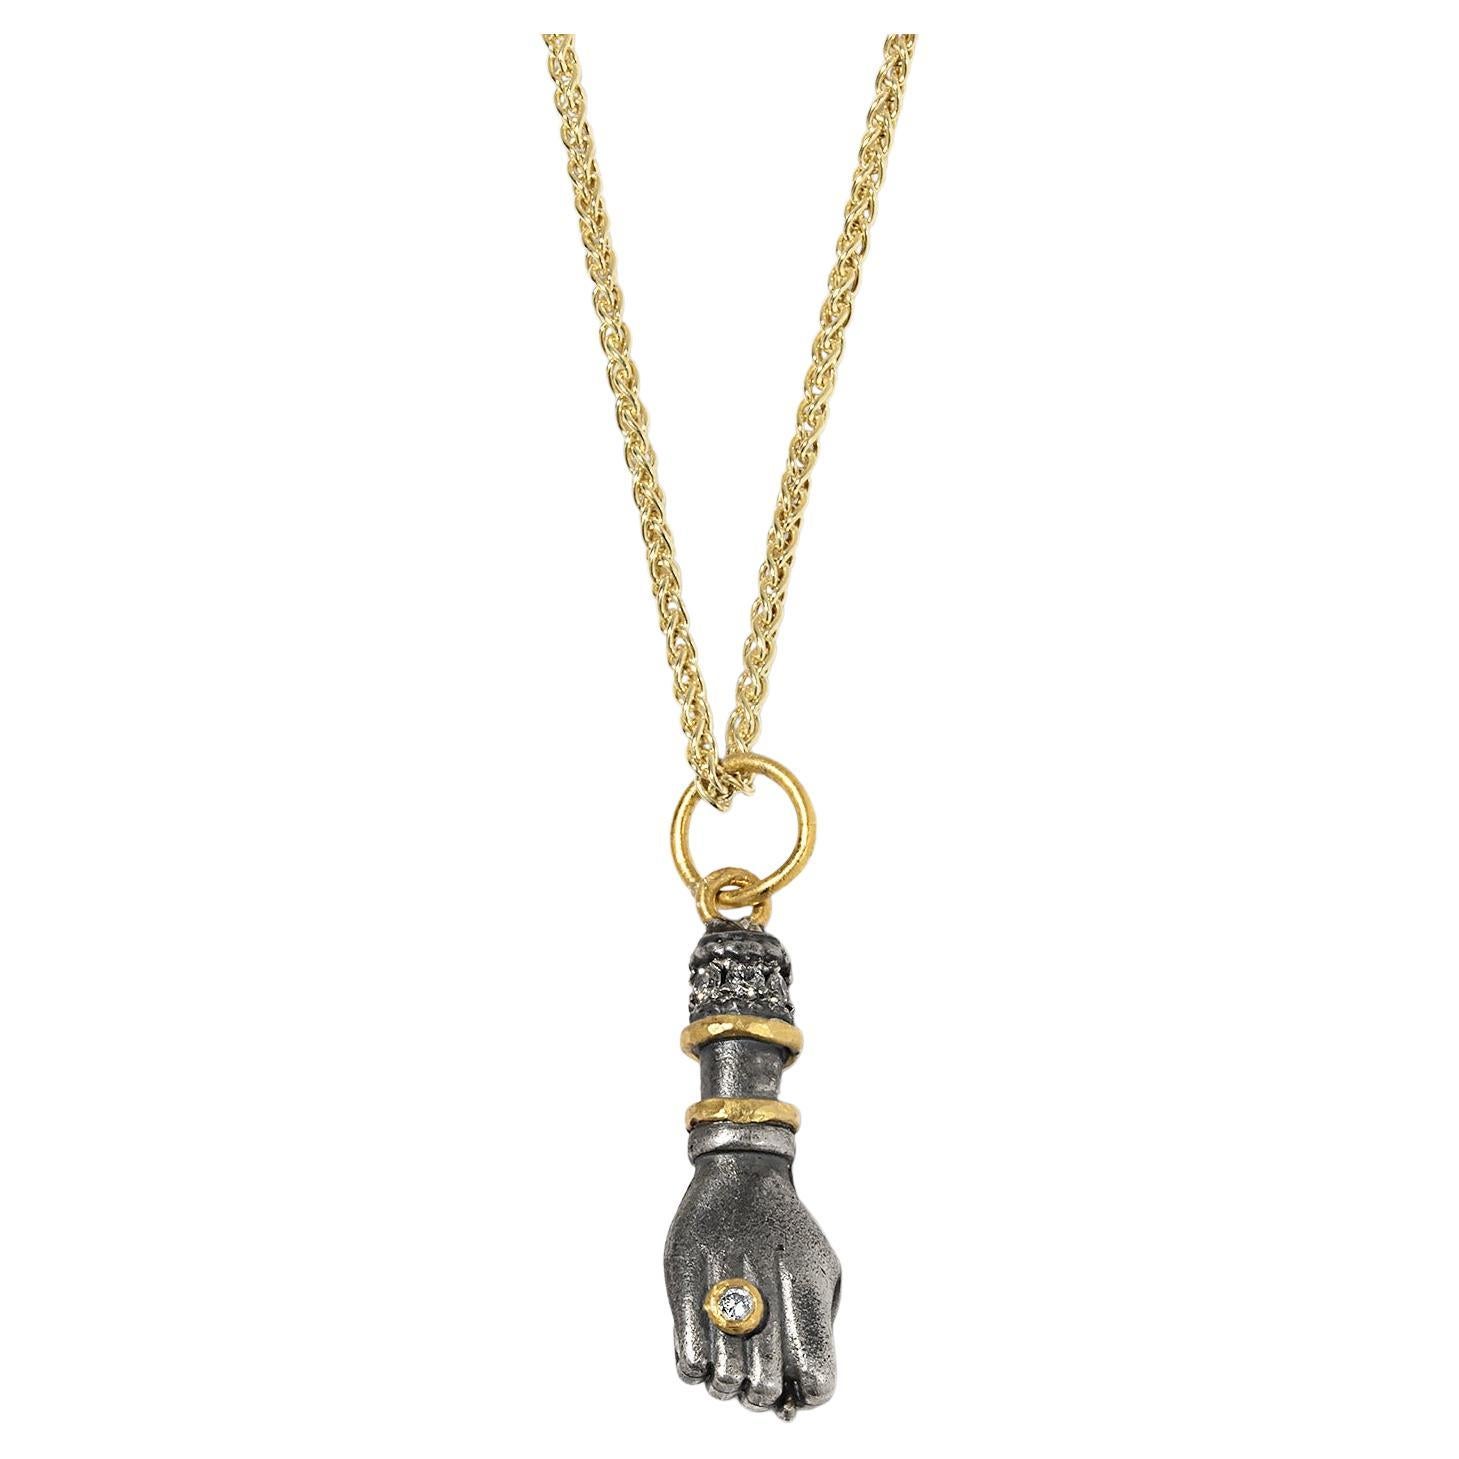 Figa Charm, Pendant Necklace Charm with Diamonds, 24kt Gold and Silver